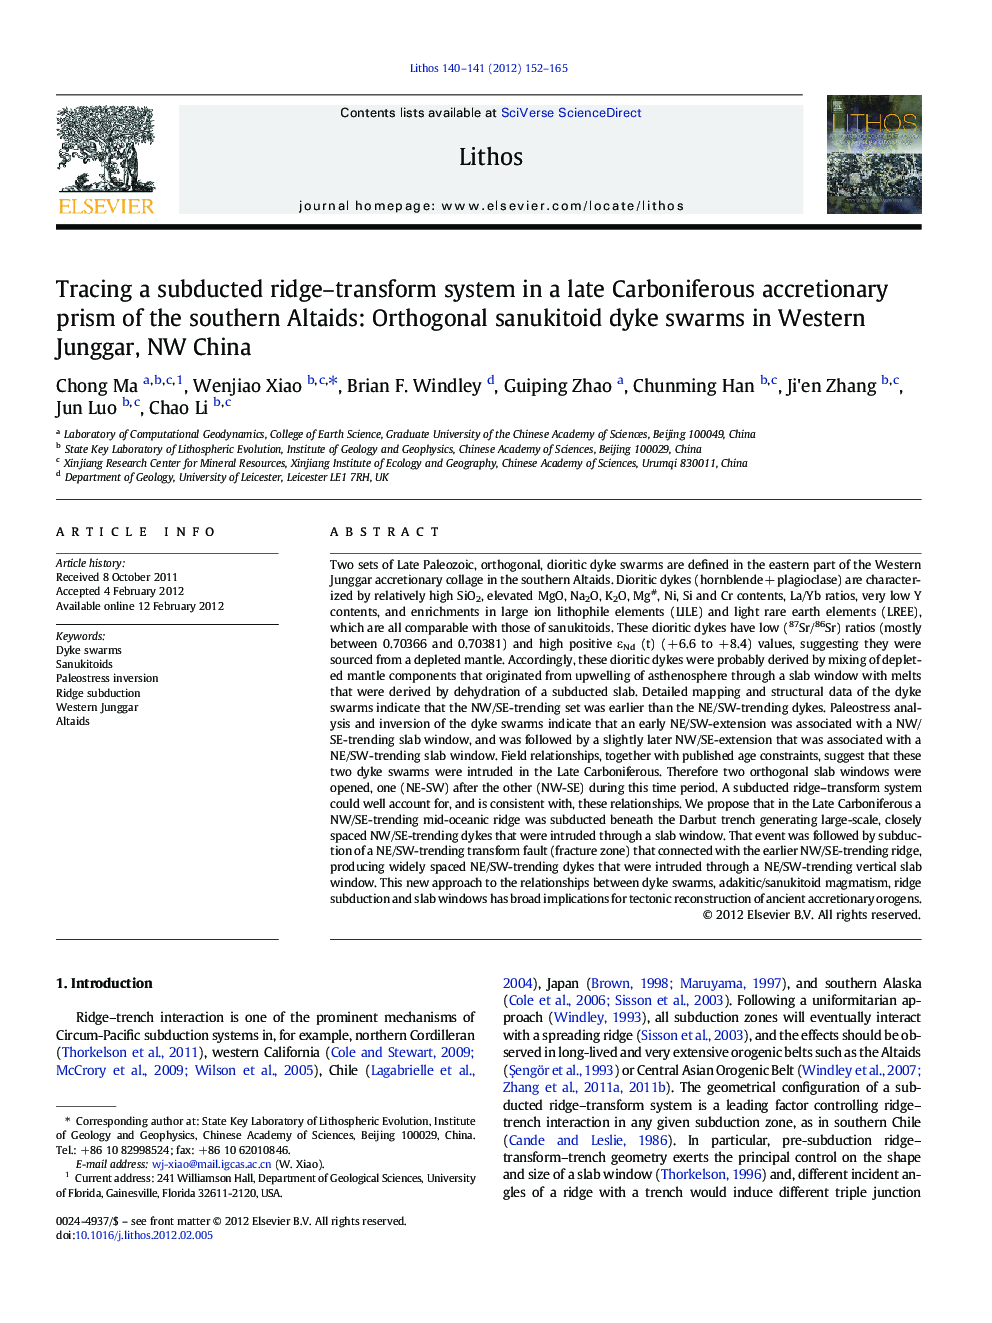 Tracing a subducted ridge–transform system in a late Carboniferous accretionary prism of the southern Altaids: Orthogonal sanukitoid dyke swarms in Western Junggar, NW China